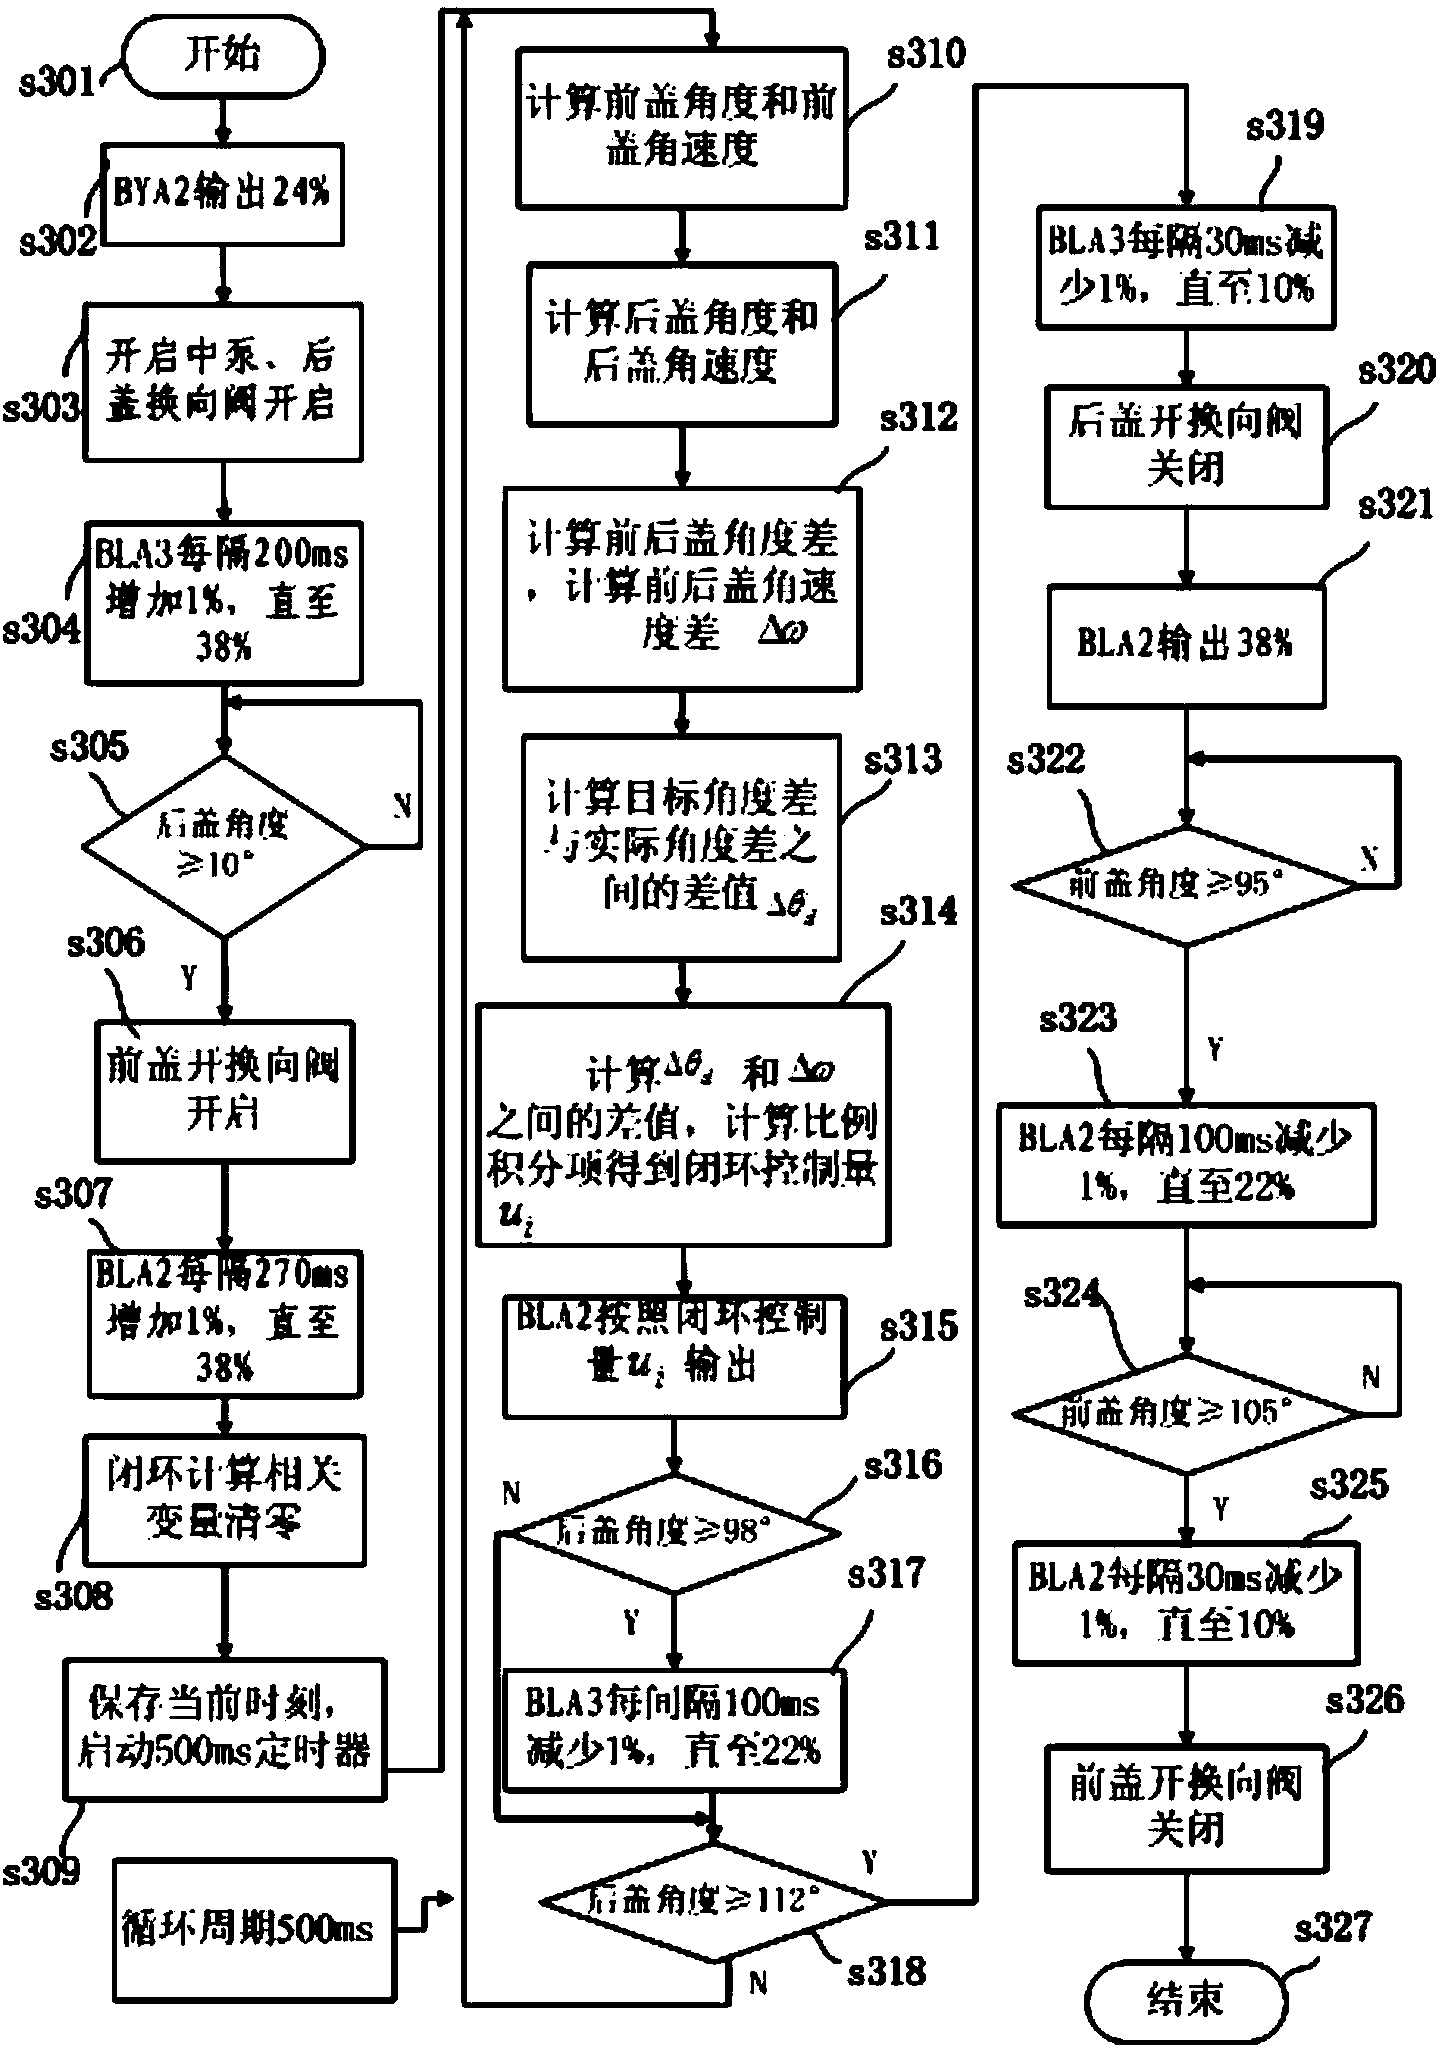 Single-side fast opening and closing control system of large double-top-cover mechanism of launching platform